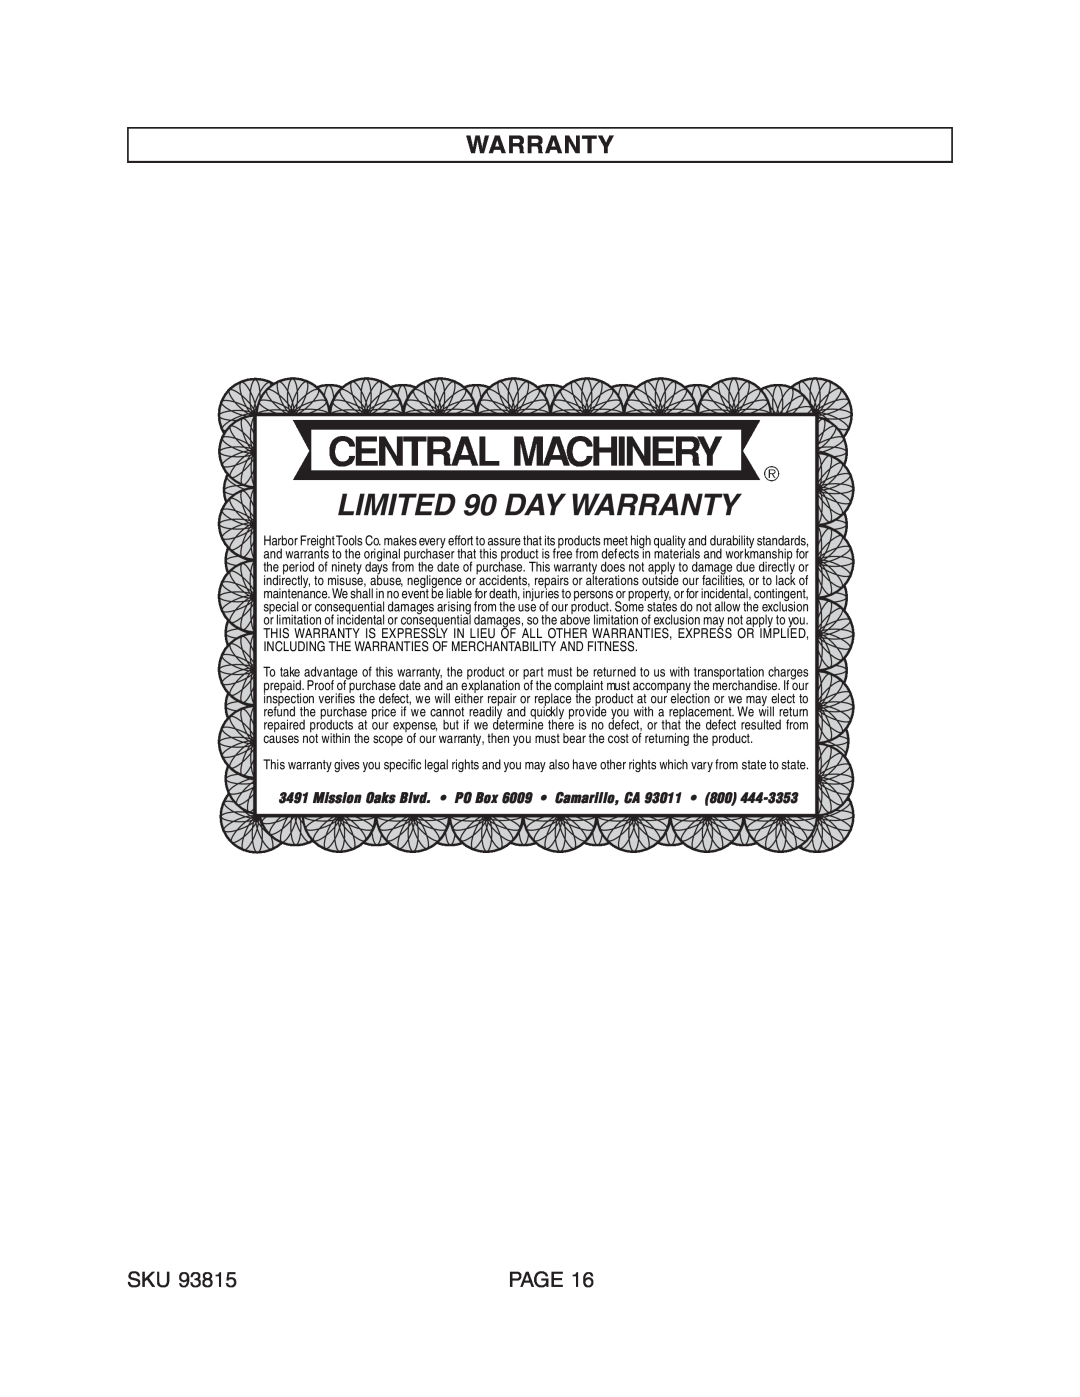 Harbor Freight Tools 93815 manual Warranty, LIMITED 90 DAY WARRANTY, Page 